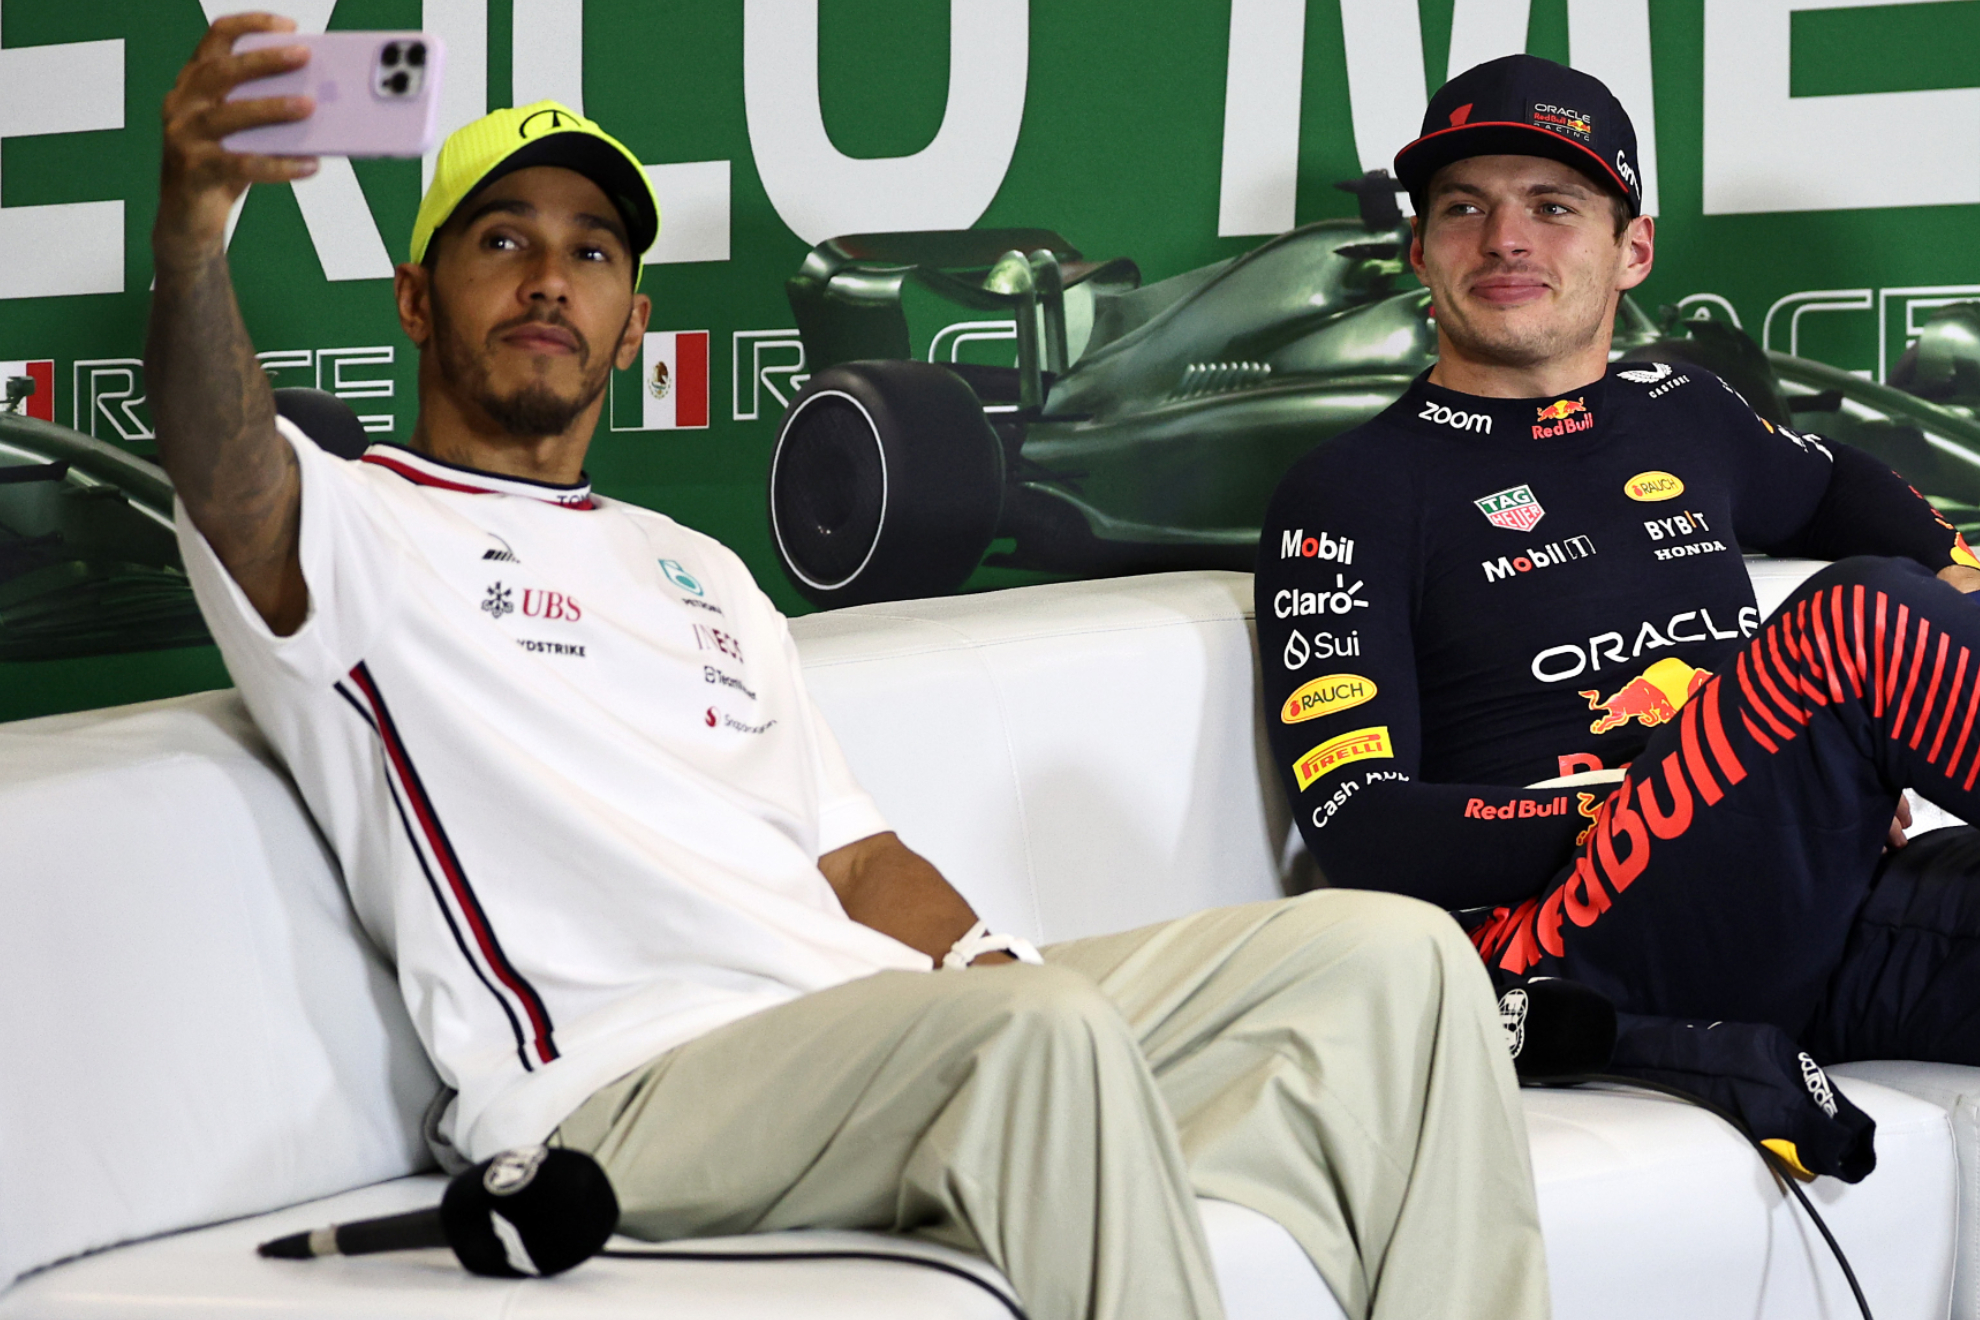 Lewis Hamilton with Max Verstappen in Mexico.